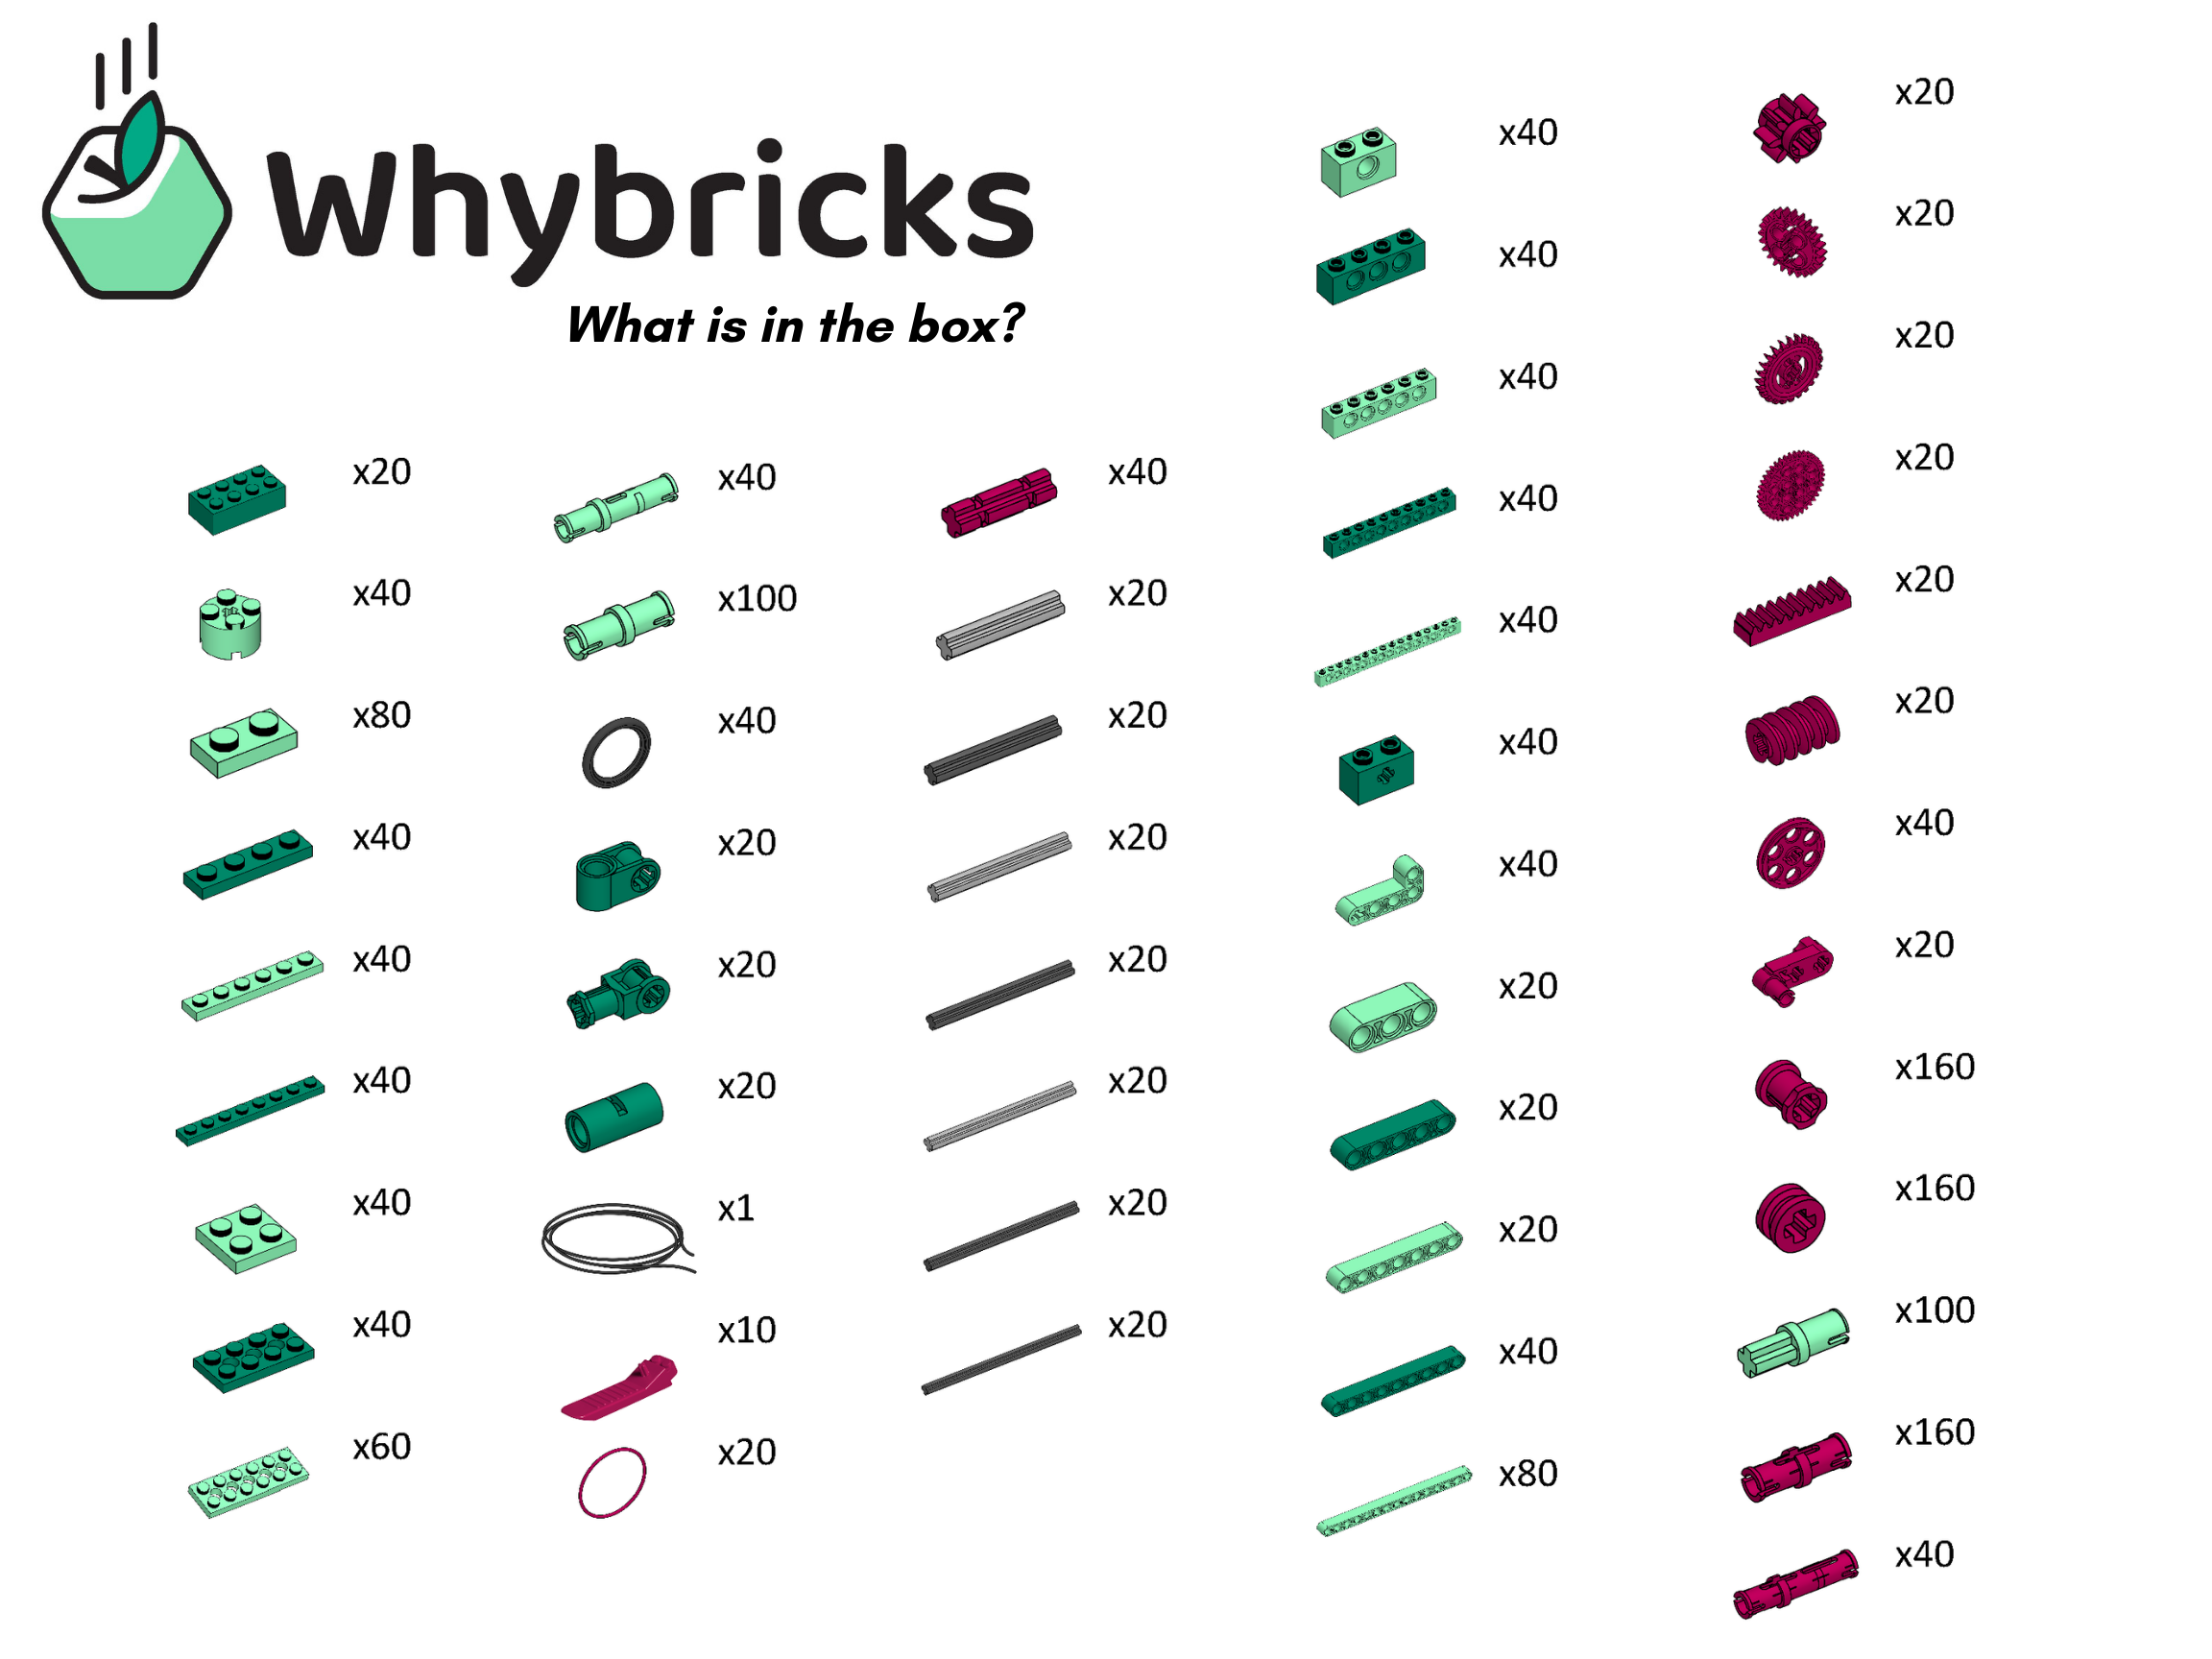 An itemised list of all the blocks in the Whybricks pack.